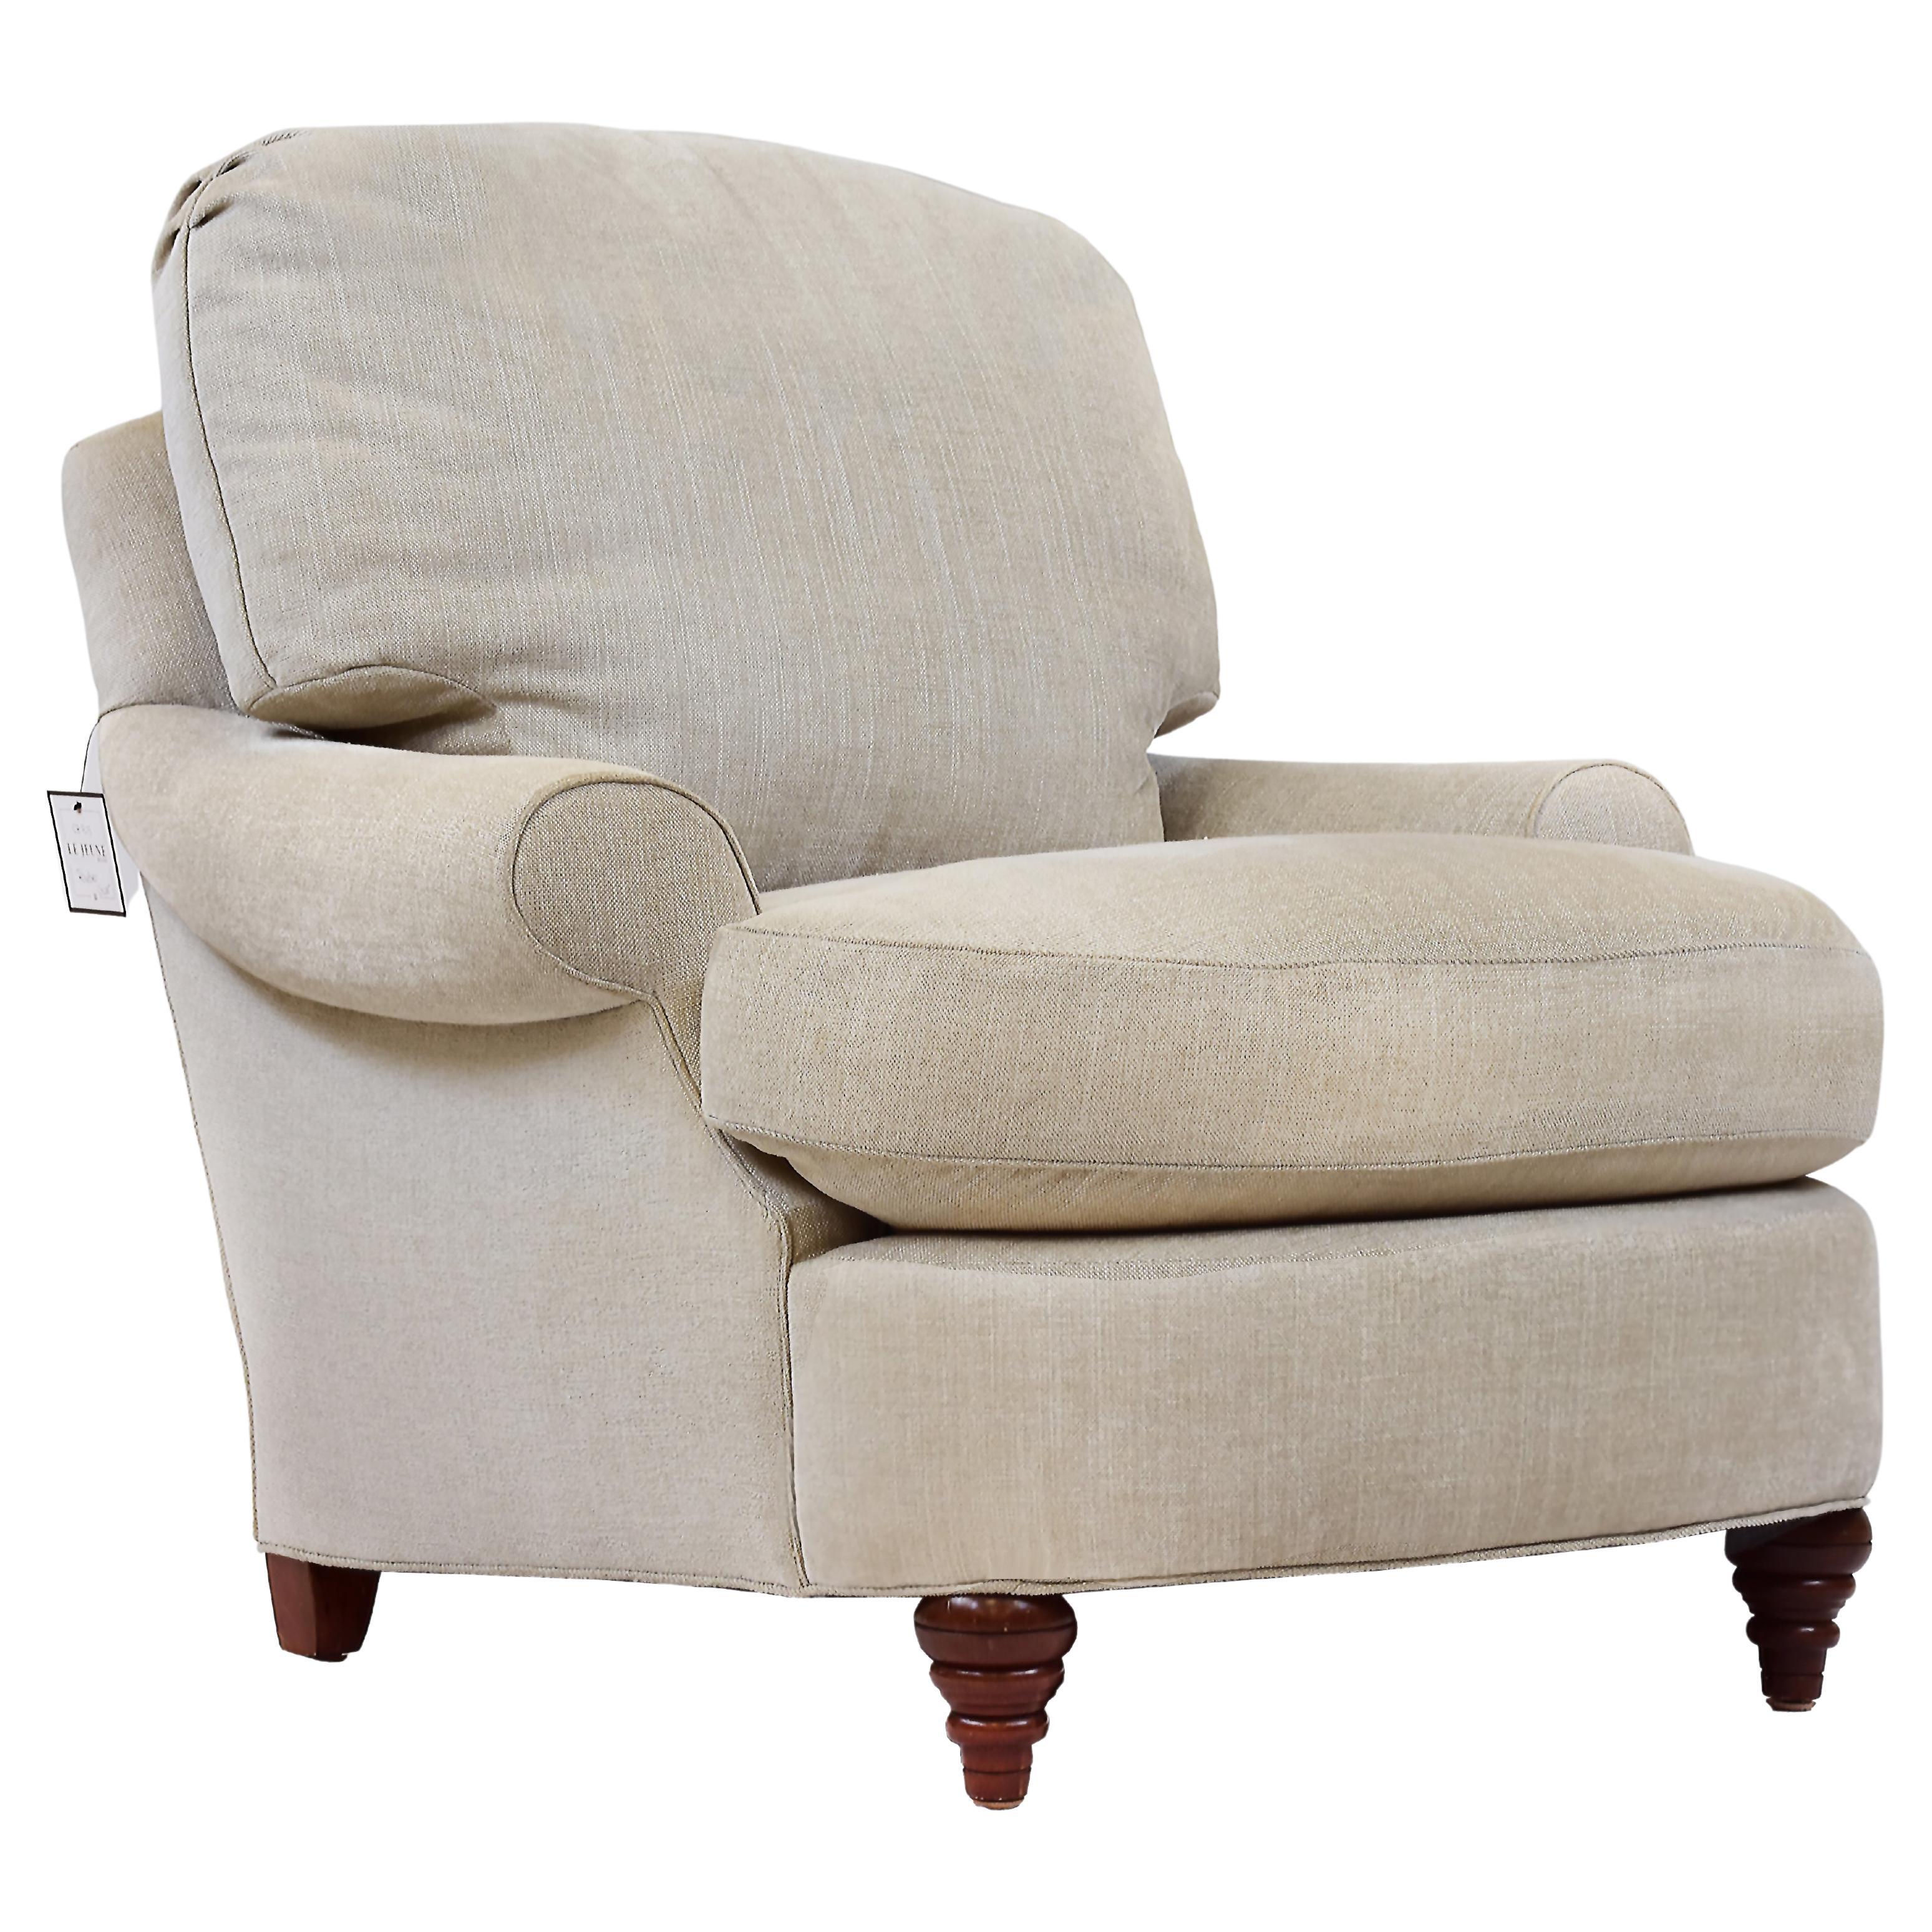 Le Jeune Upholstery Roadster Lounge Chair Showroom Model in Chenille For Sale